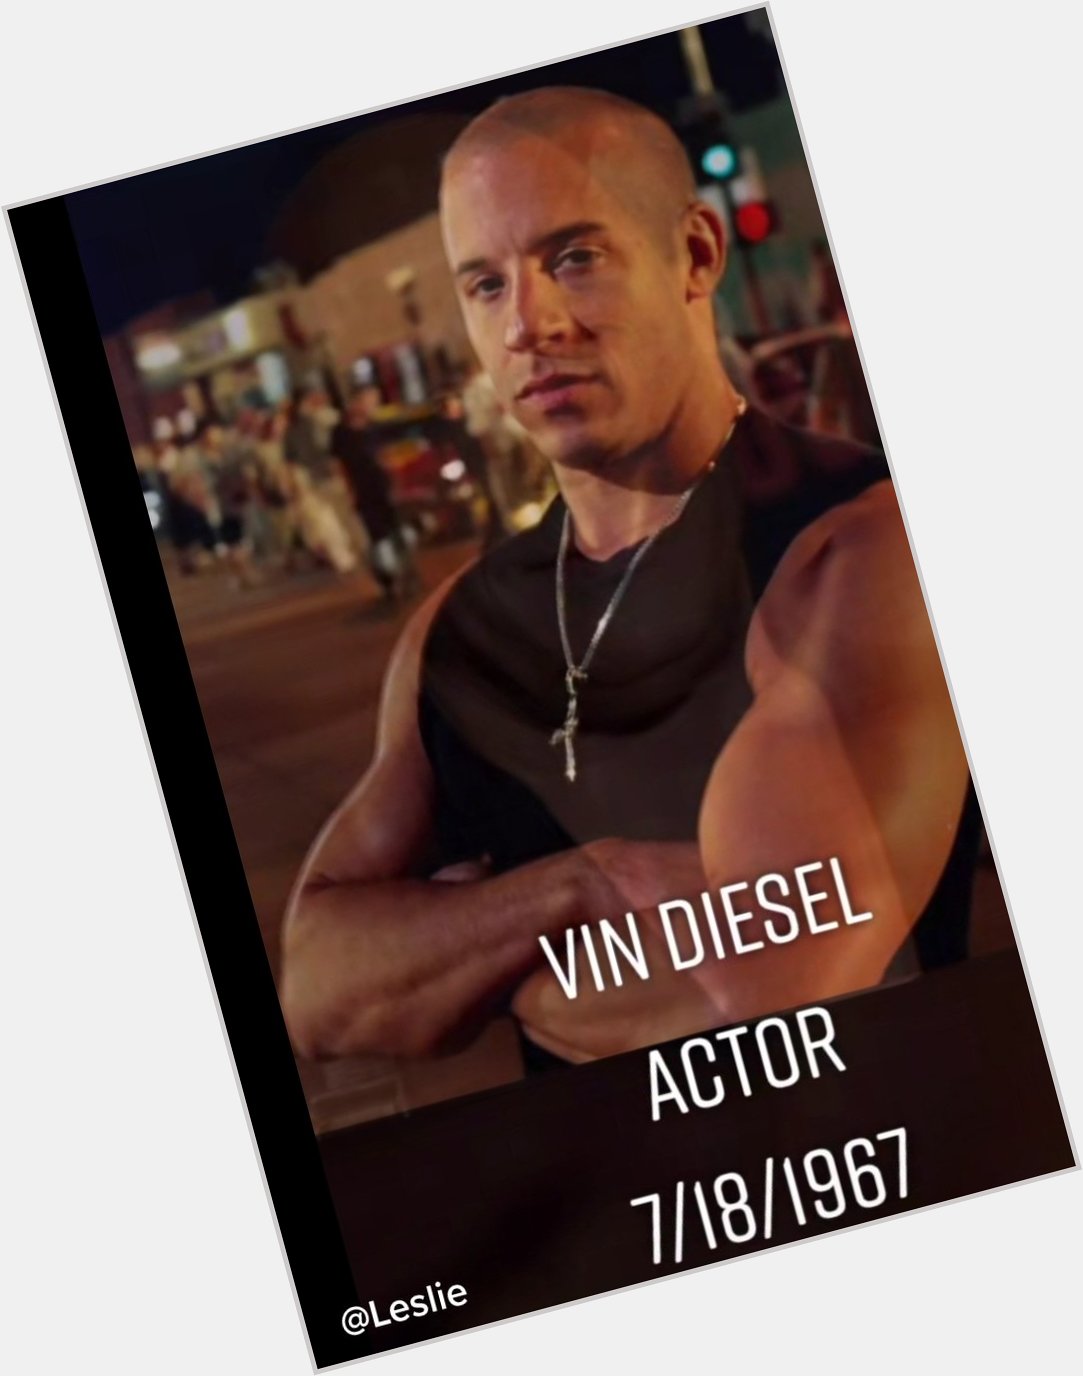 Happy birthday to Vin diesel fast and Furious actor 